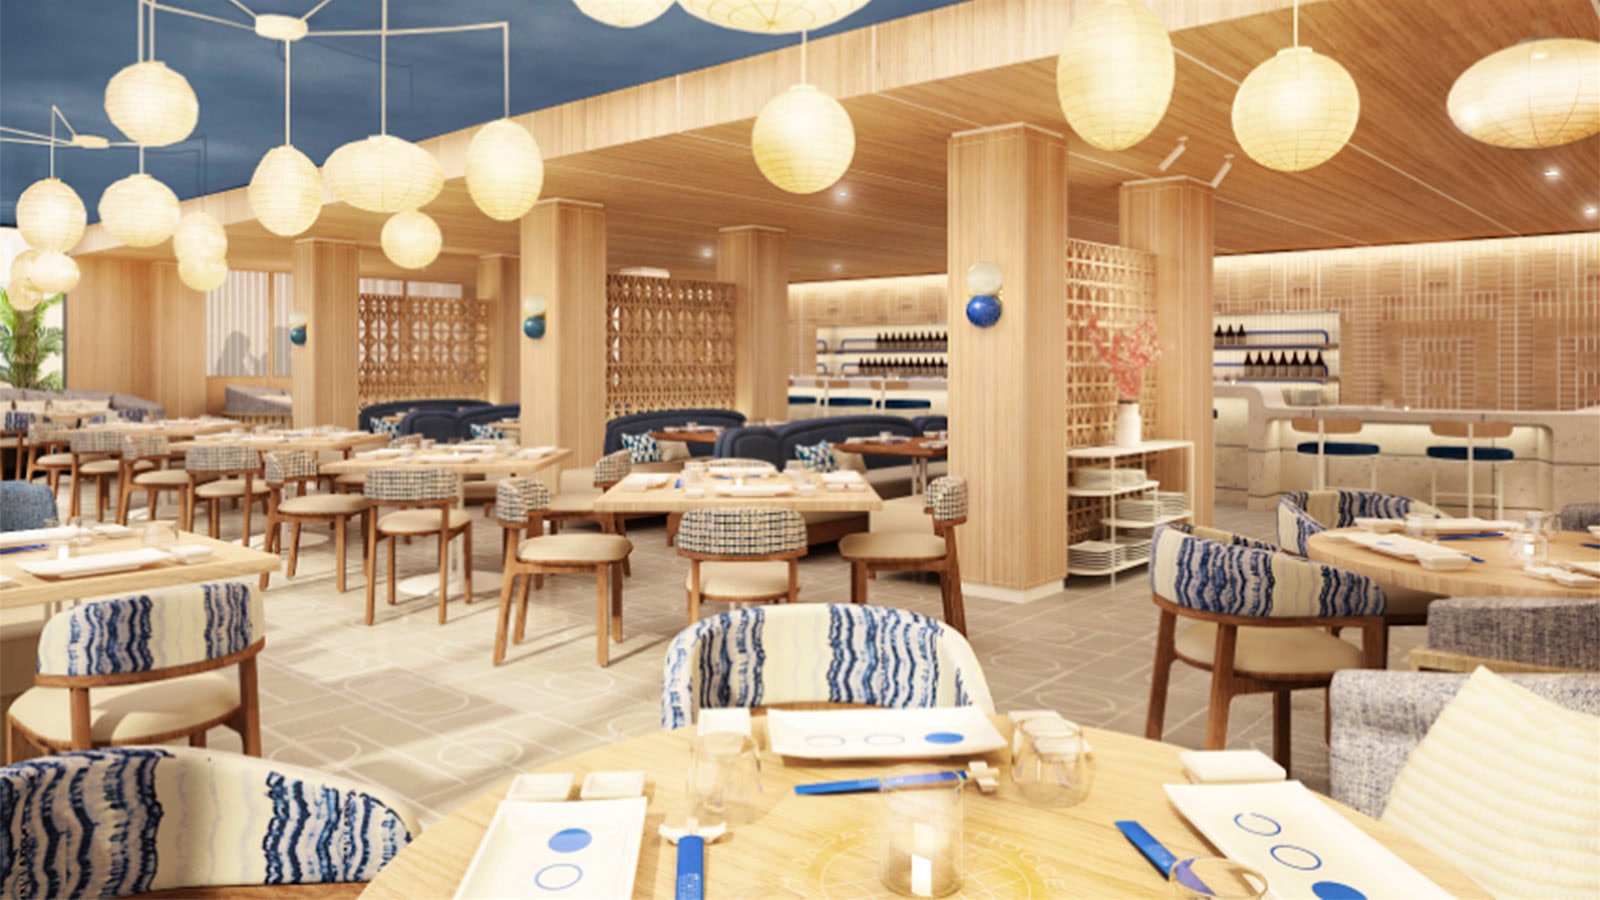  The dining room at the Japanese Bocce Club, designed in light wood, with a blue ceiling and blue accents on the chairs.